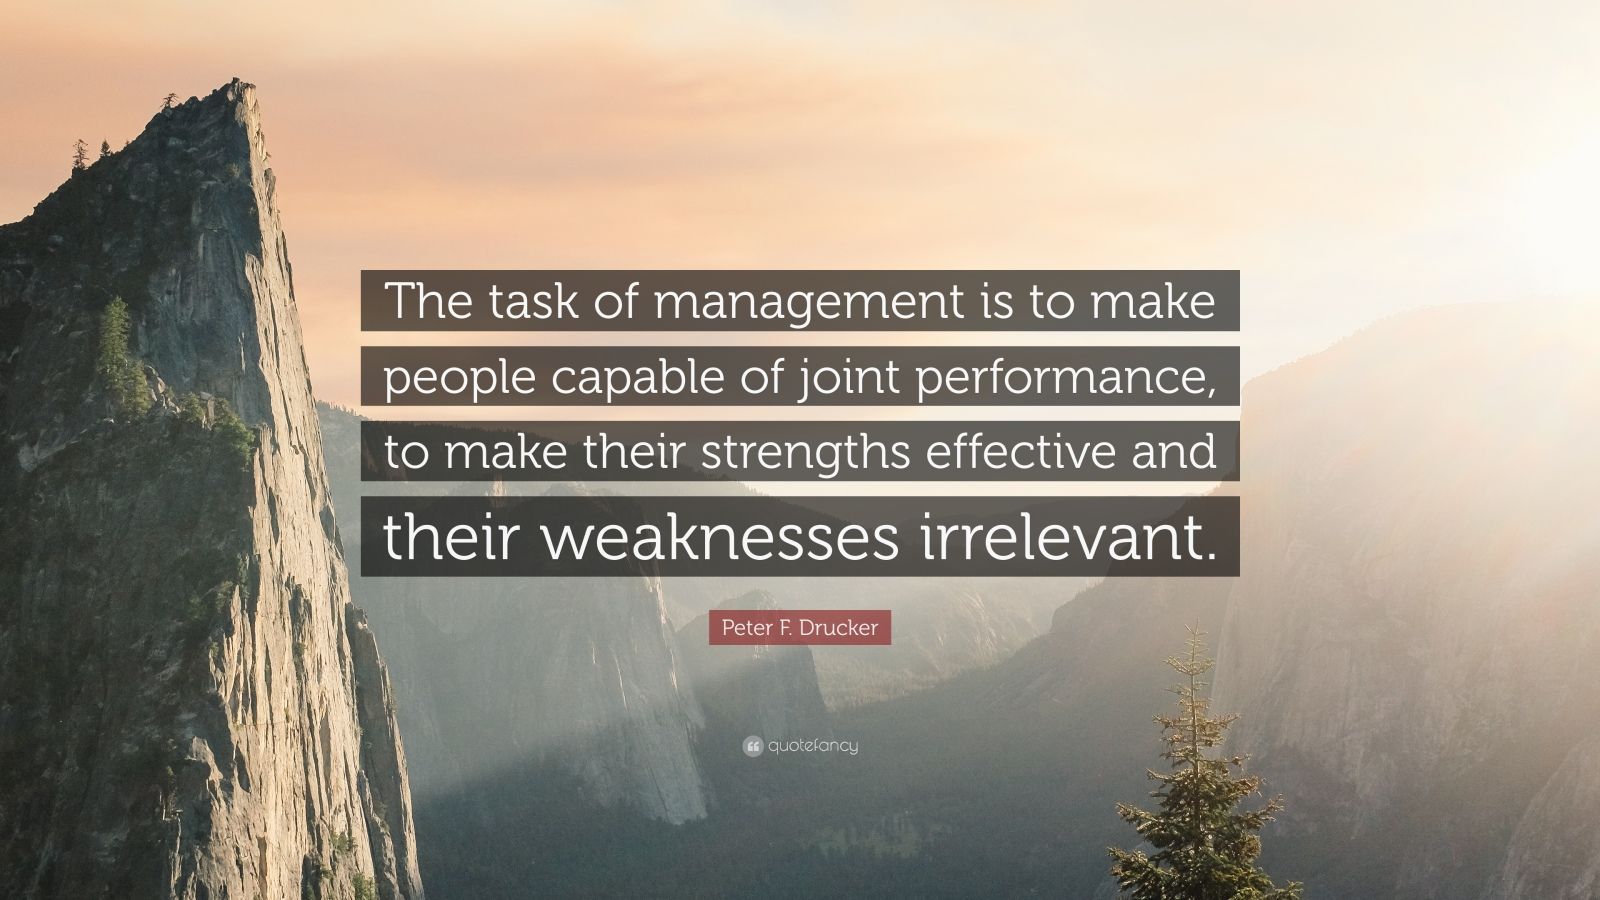 Peter F. Drucker Quote: “The task of management is to make people